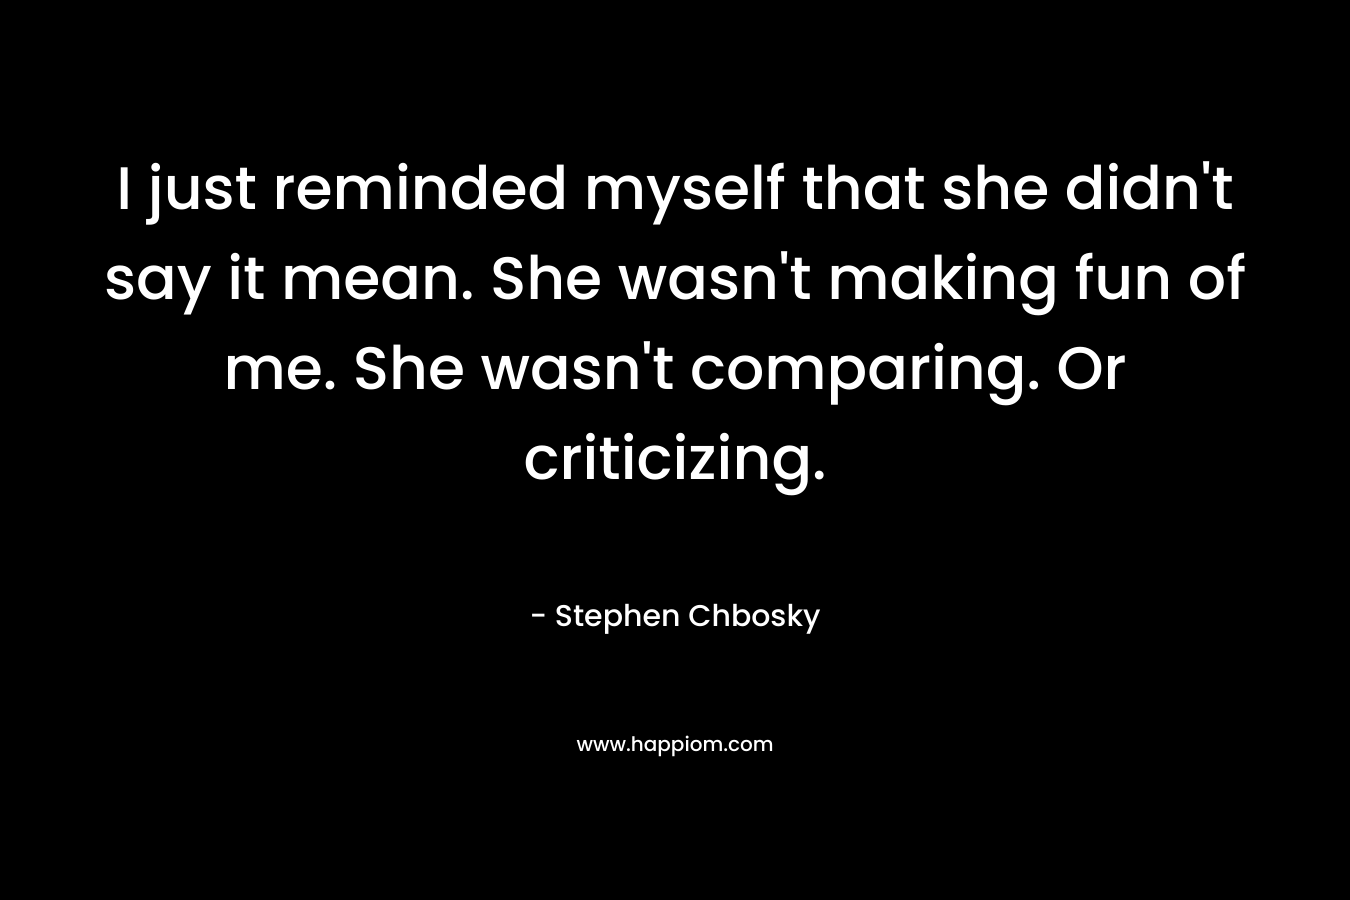 I just reminded myself that she didn’t say it mean. She wasn’t making fun of me. She wasn’t comparing. Or criticizing. – Stephen Chbosky